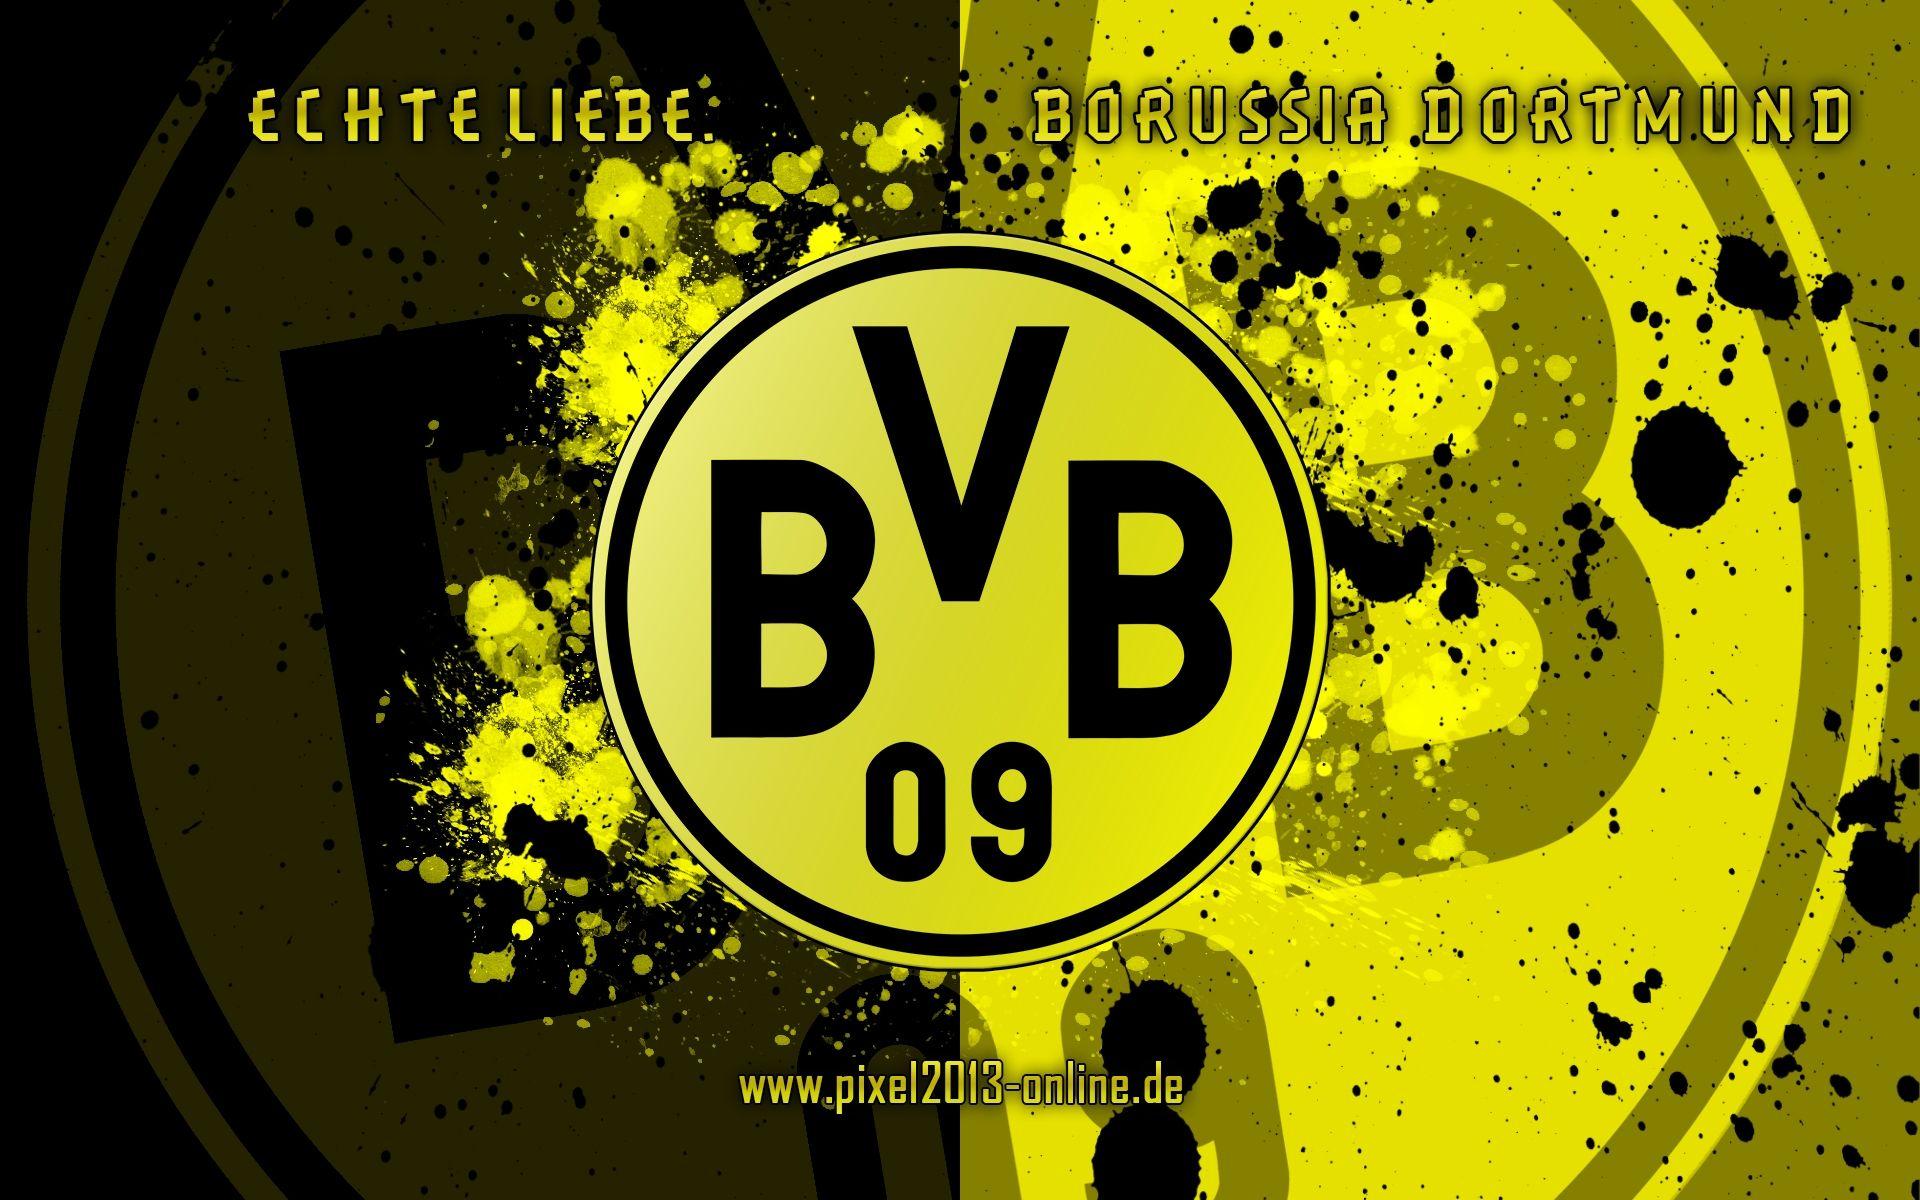 Borussia Dortmund HD Wallpapers And Photos download